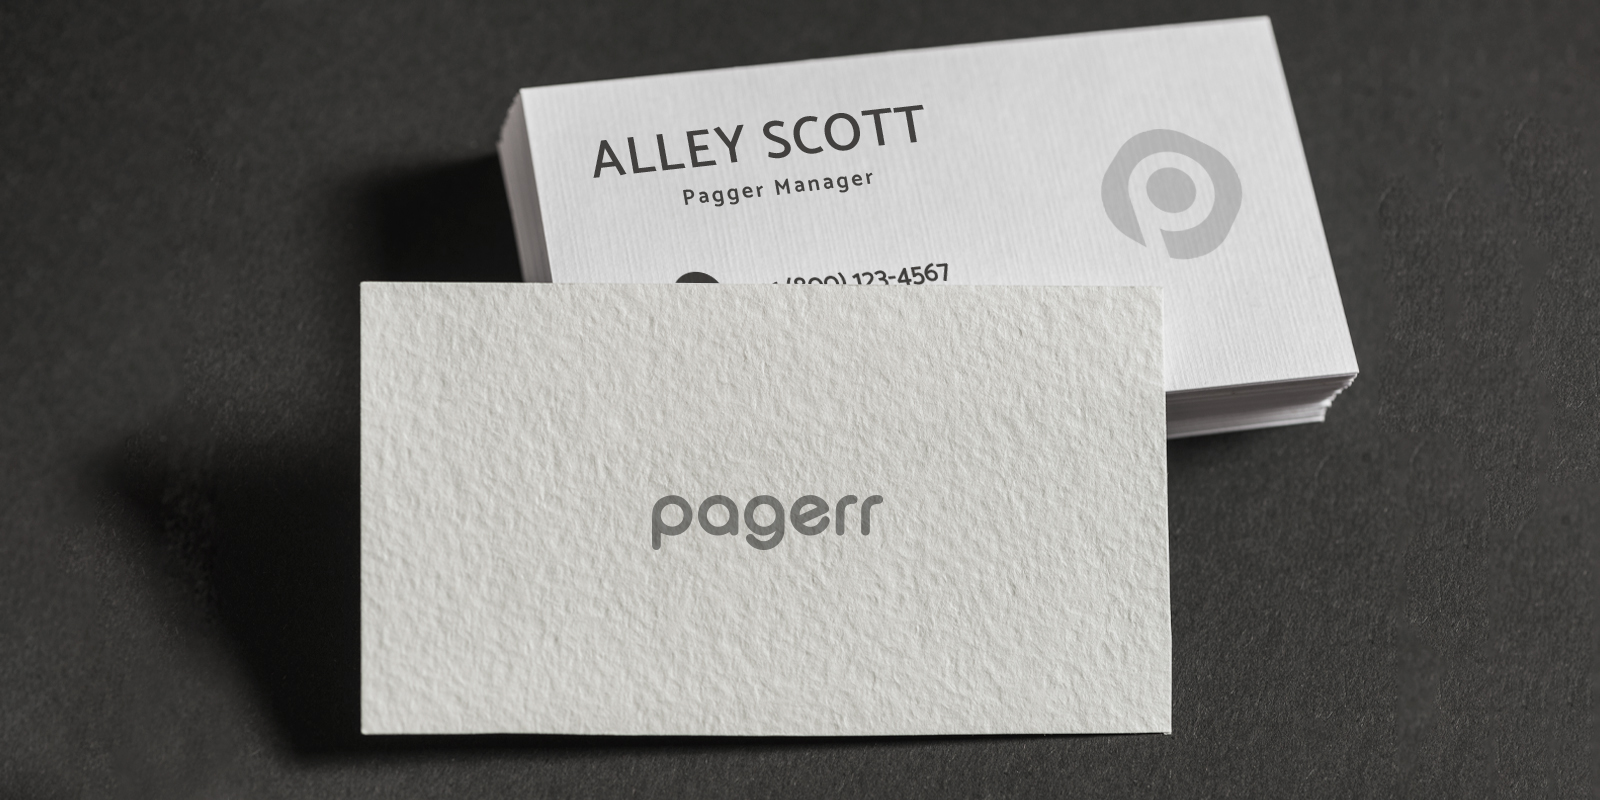 Special material business cards in Rockingham - Print with Pagerr